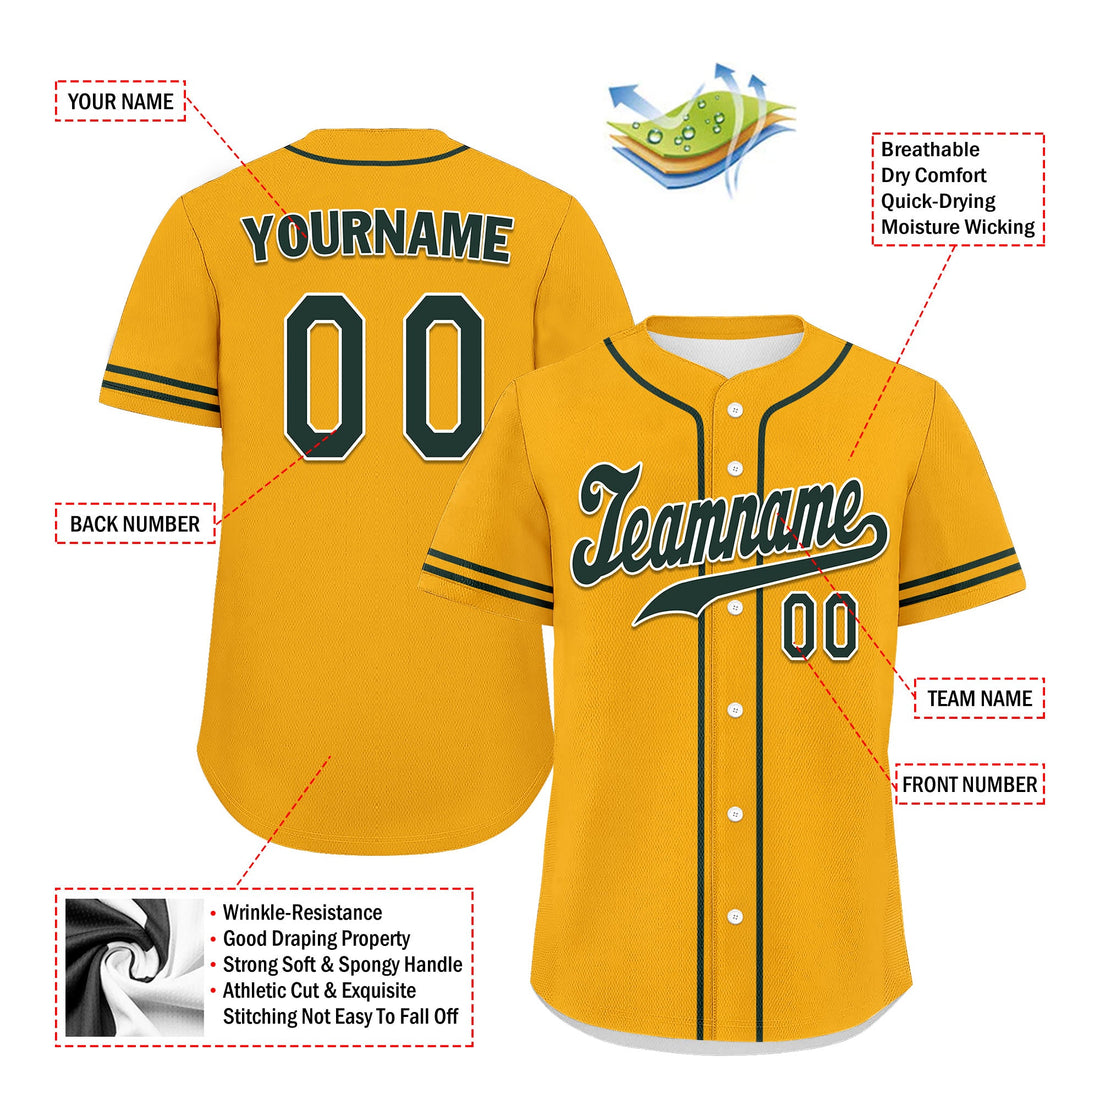 Custom Yellow Classic Style Green Personalized Authentic Baseball Jersey UN002-bd0b00d8-c